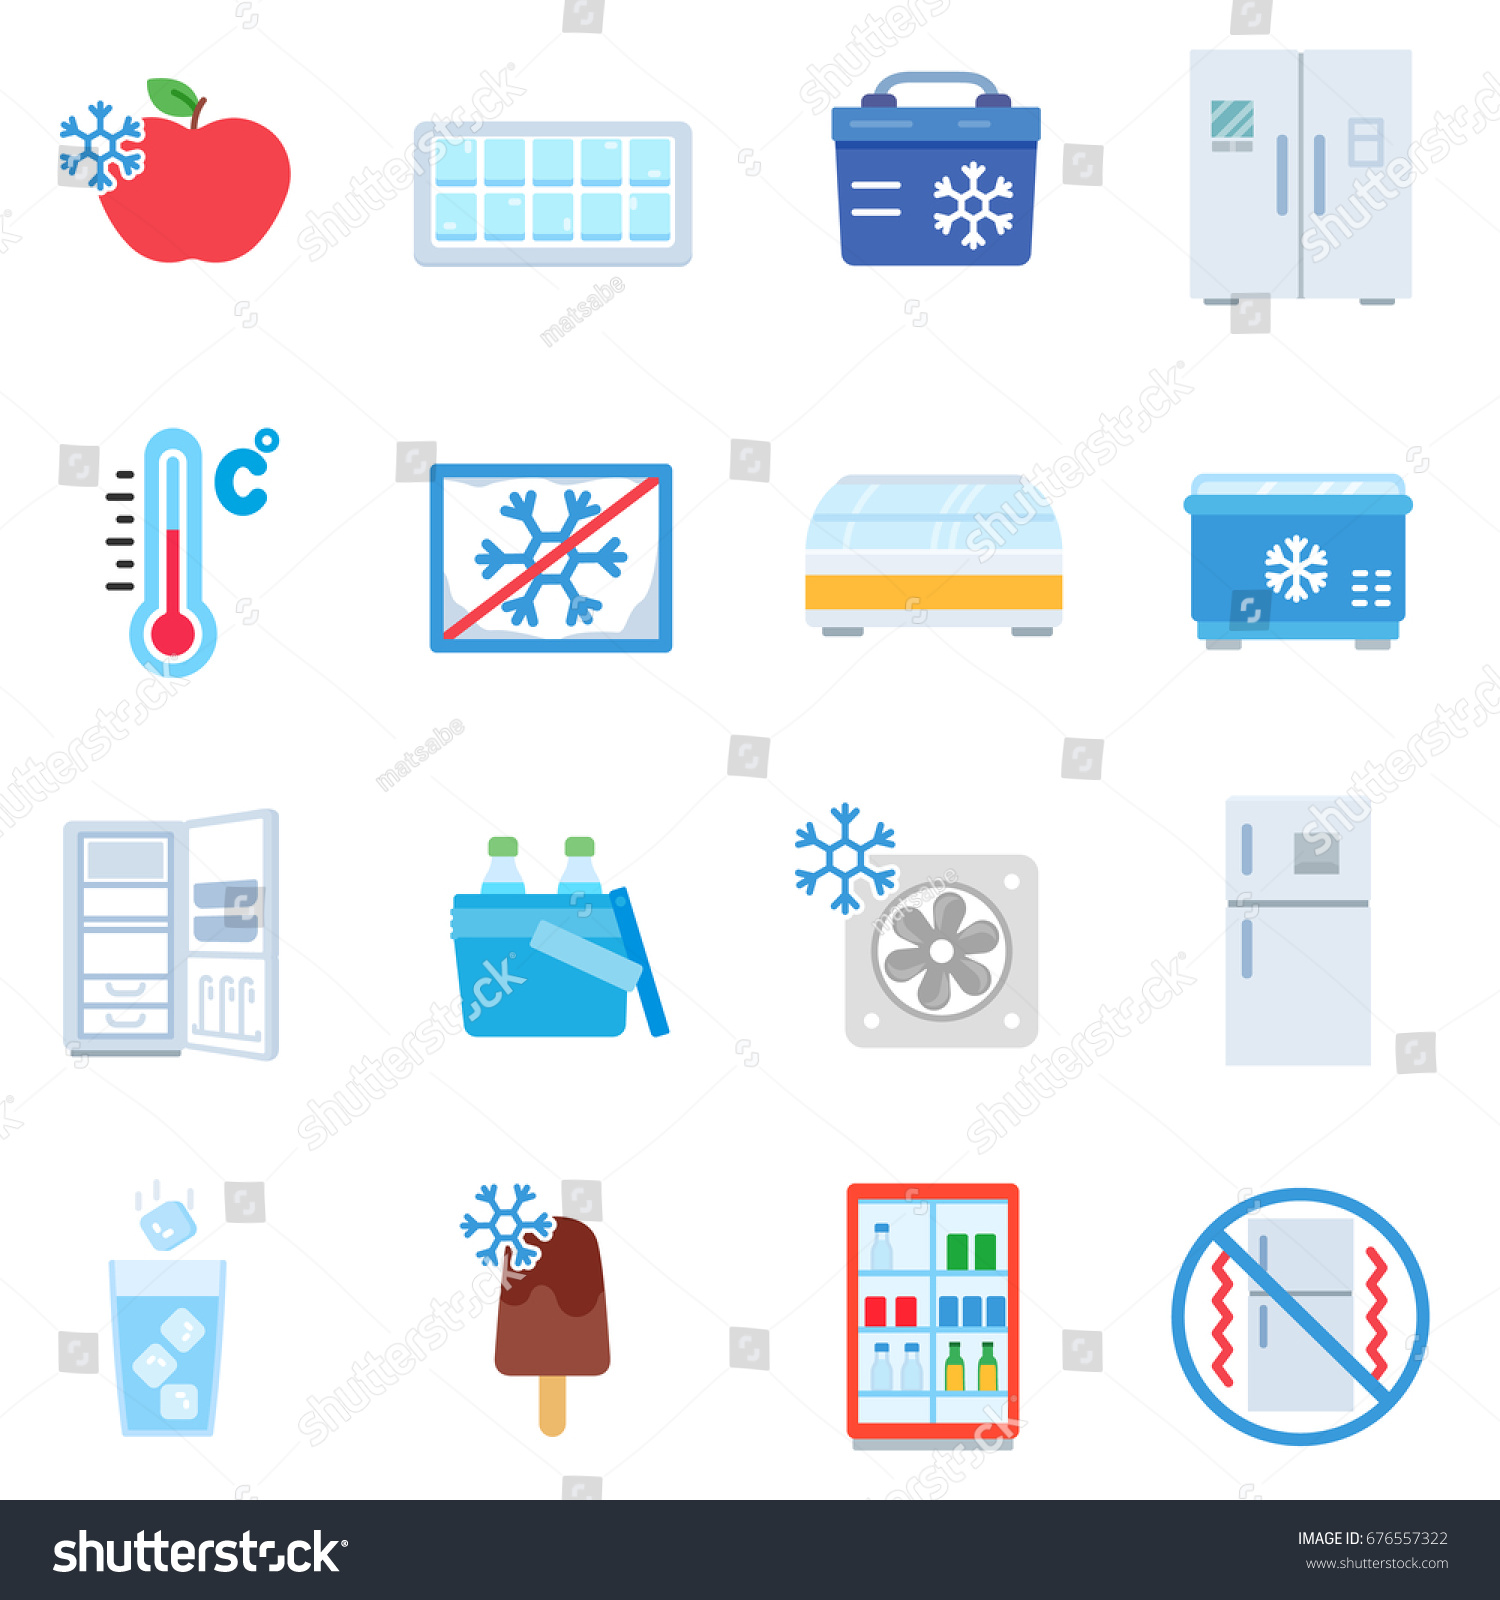 SVG of Fridge. icon set in flat style. Cooling products. Refrigerators for storing frozen products svg